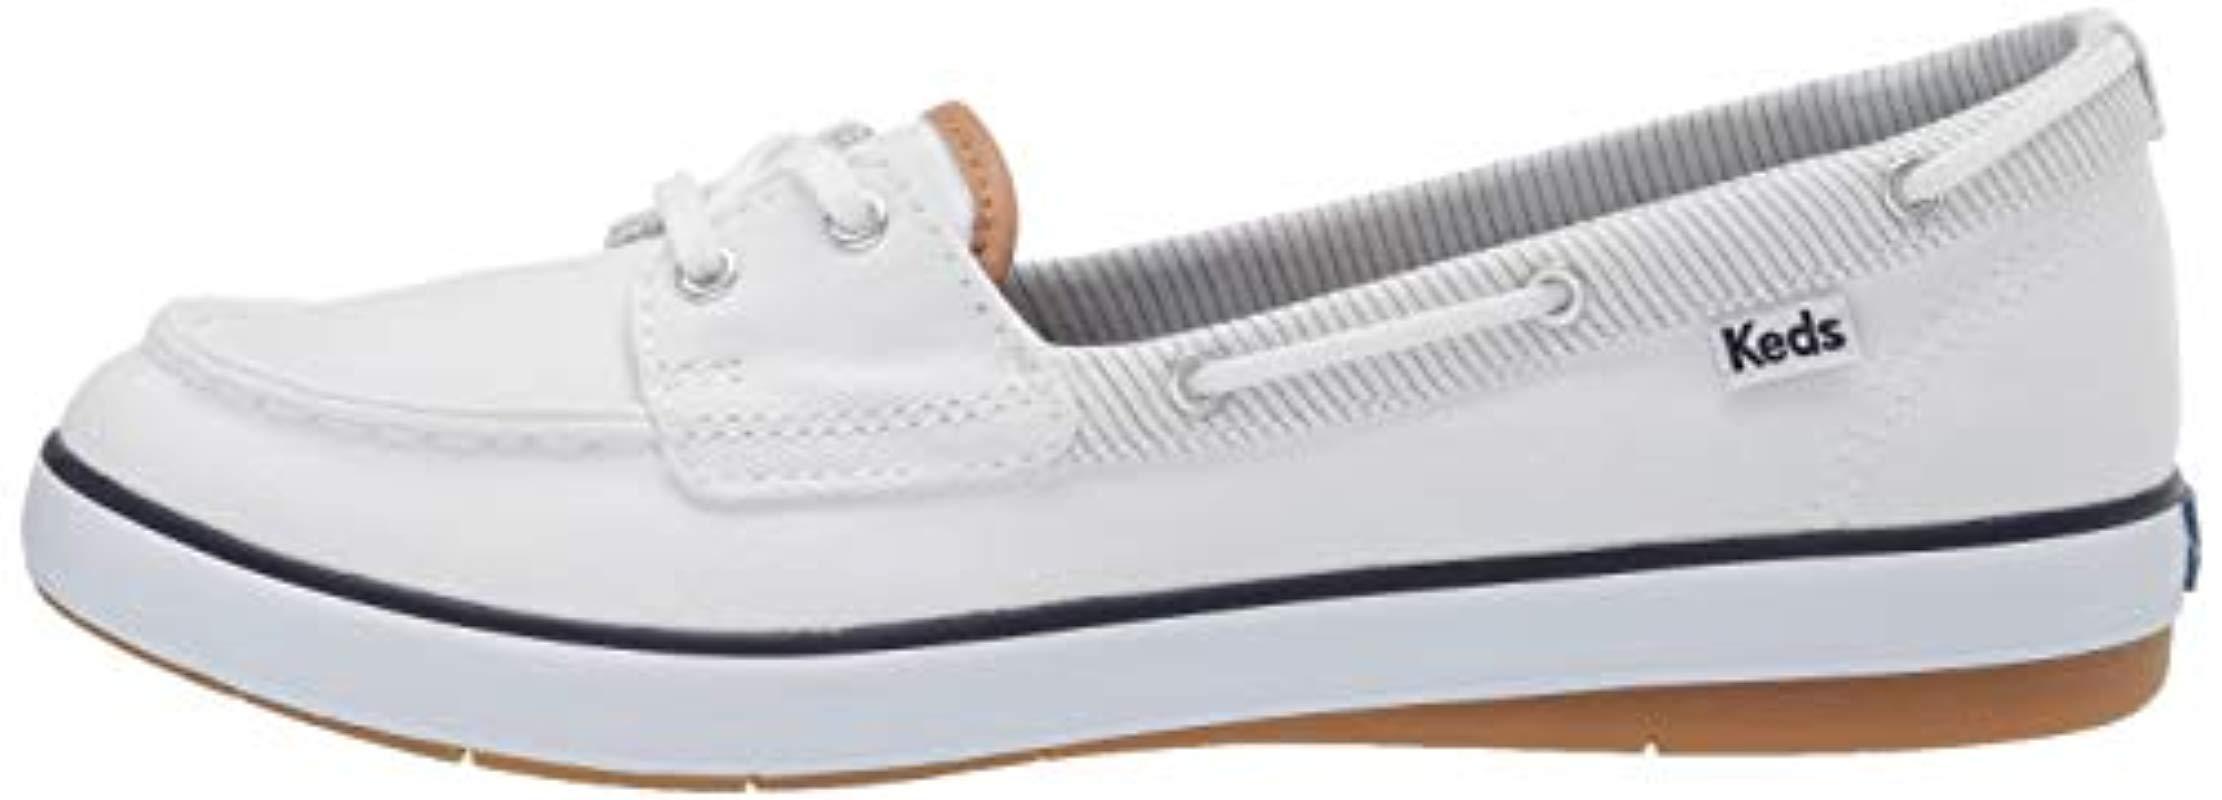 Keds Charter Boat Shoe in White | Lyst